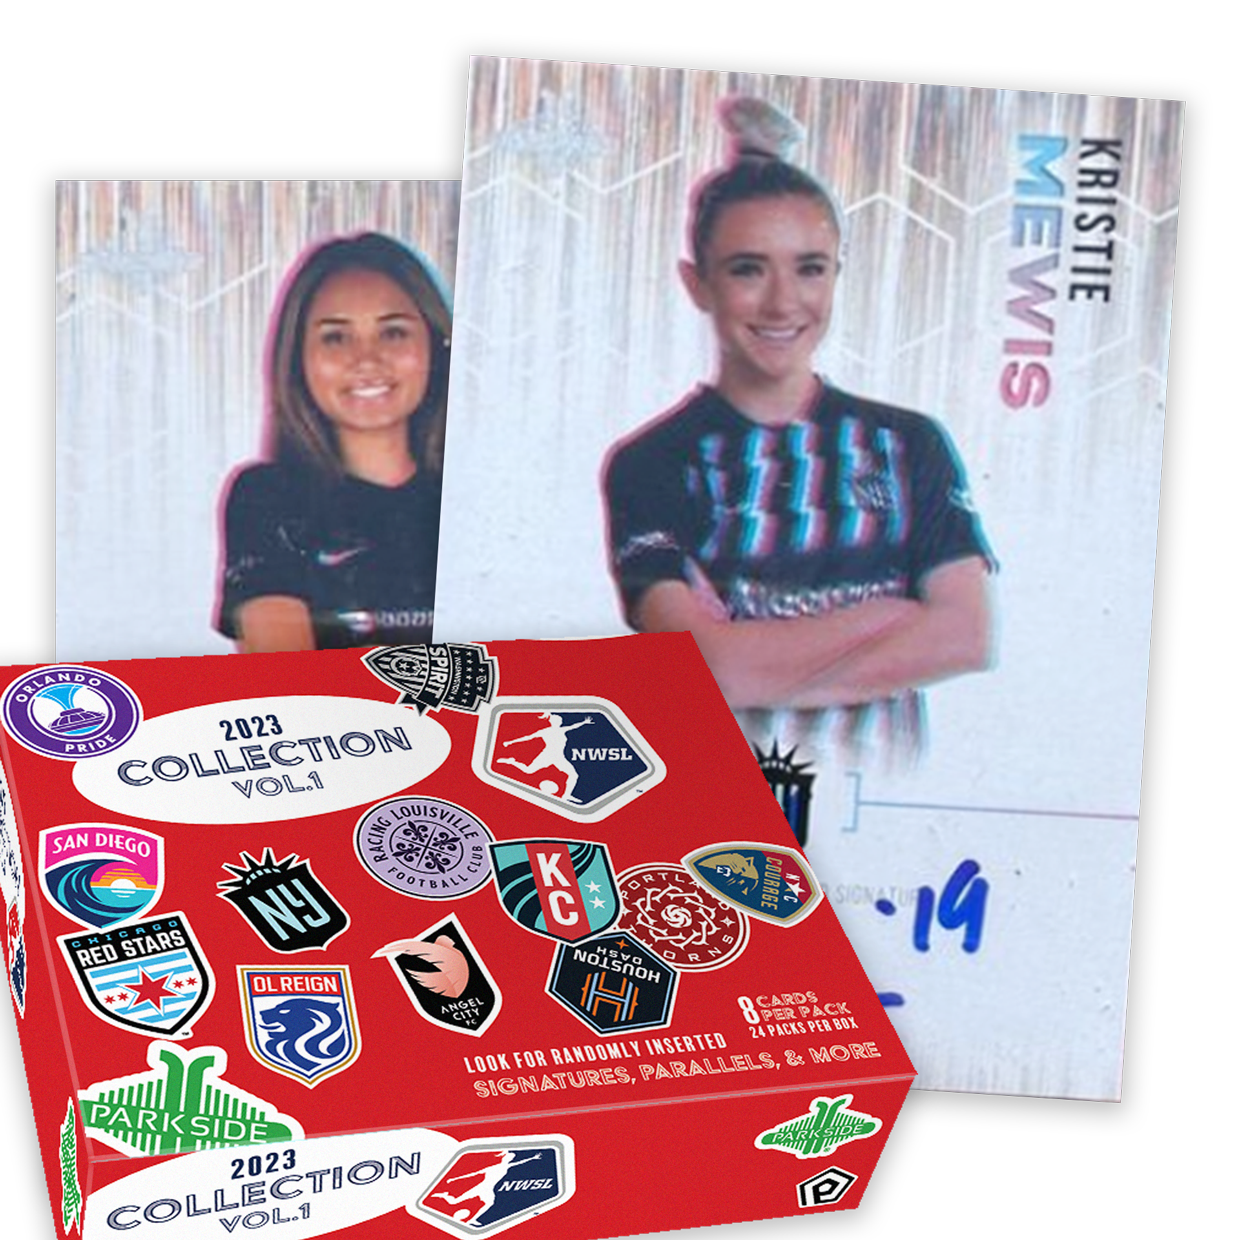 The 2023 NWSL Collection Vol. 1 Hobby Box